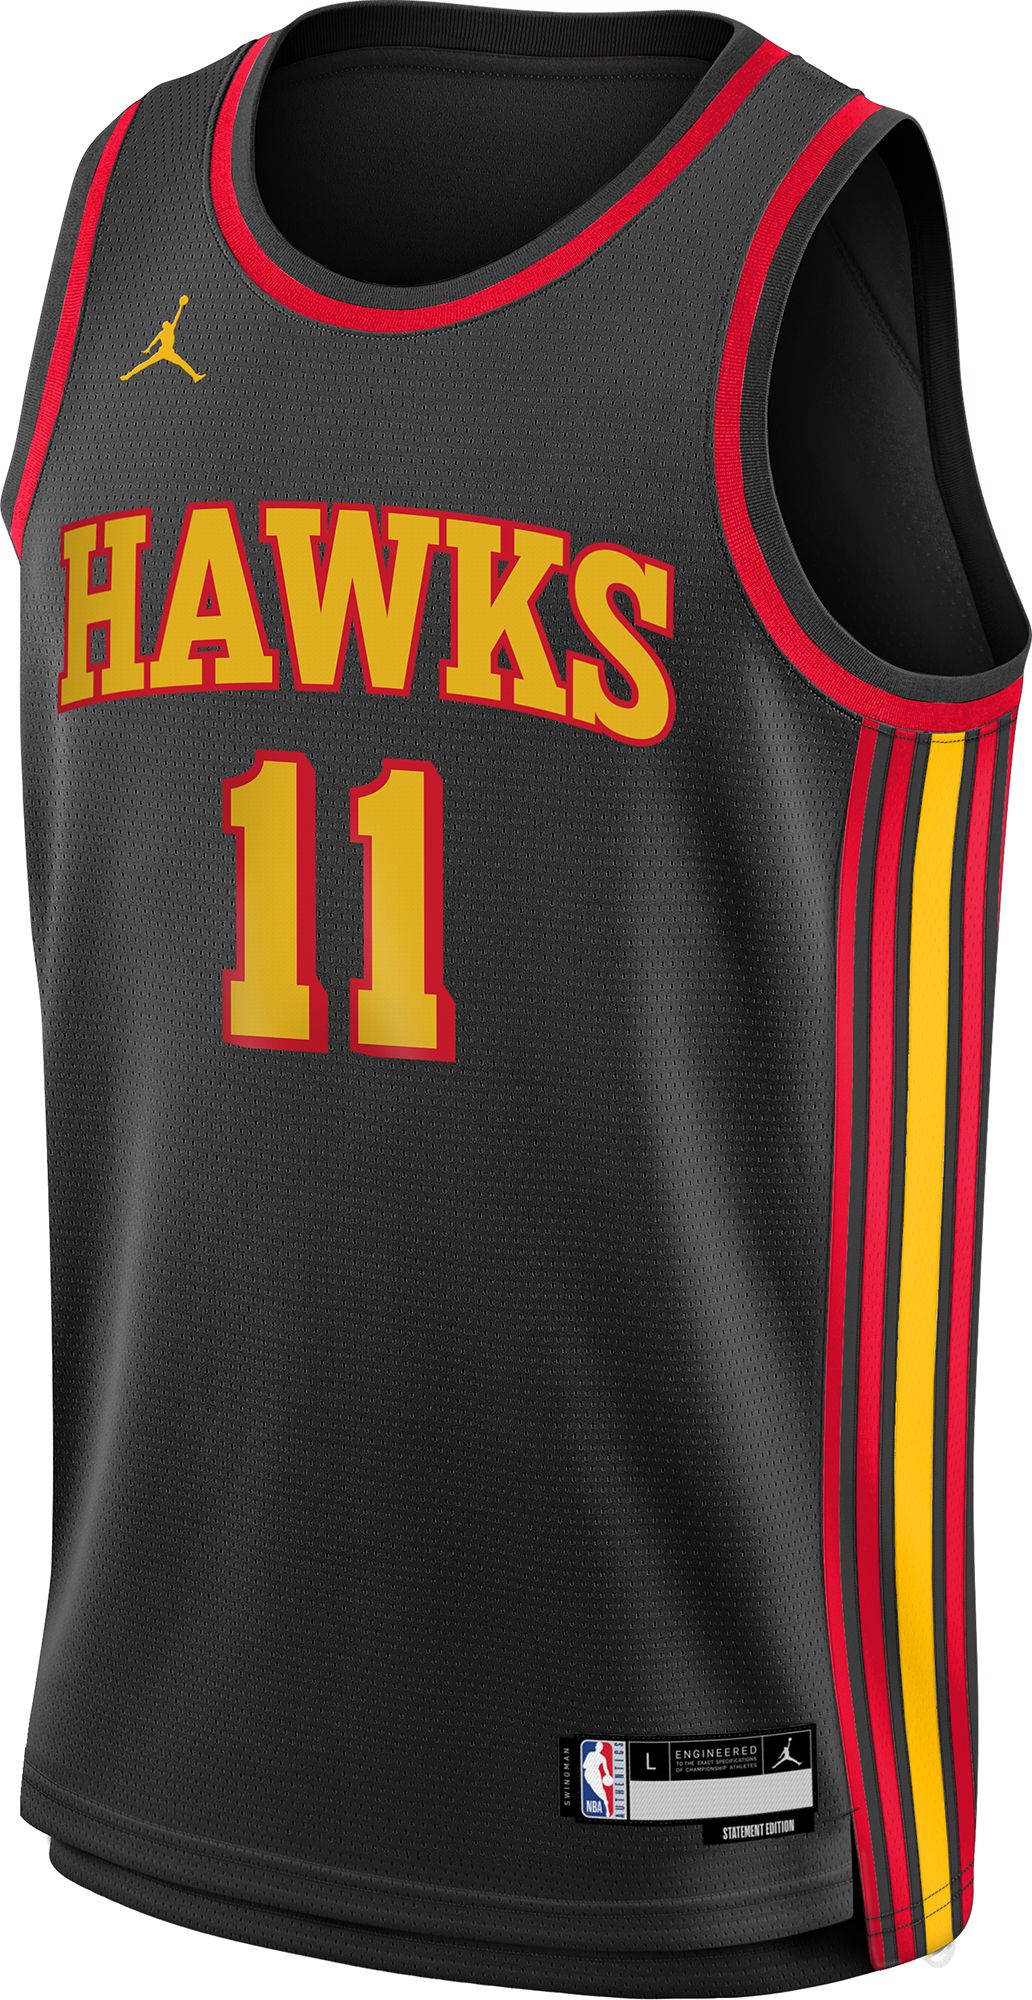 Hawks youth player jersey